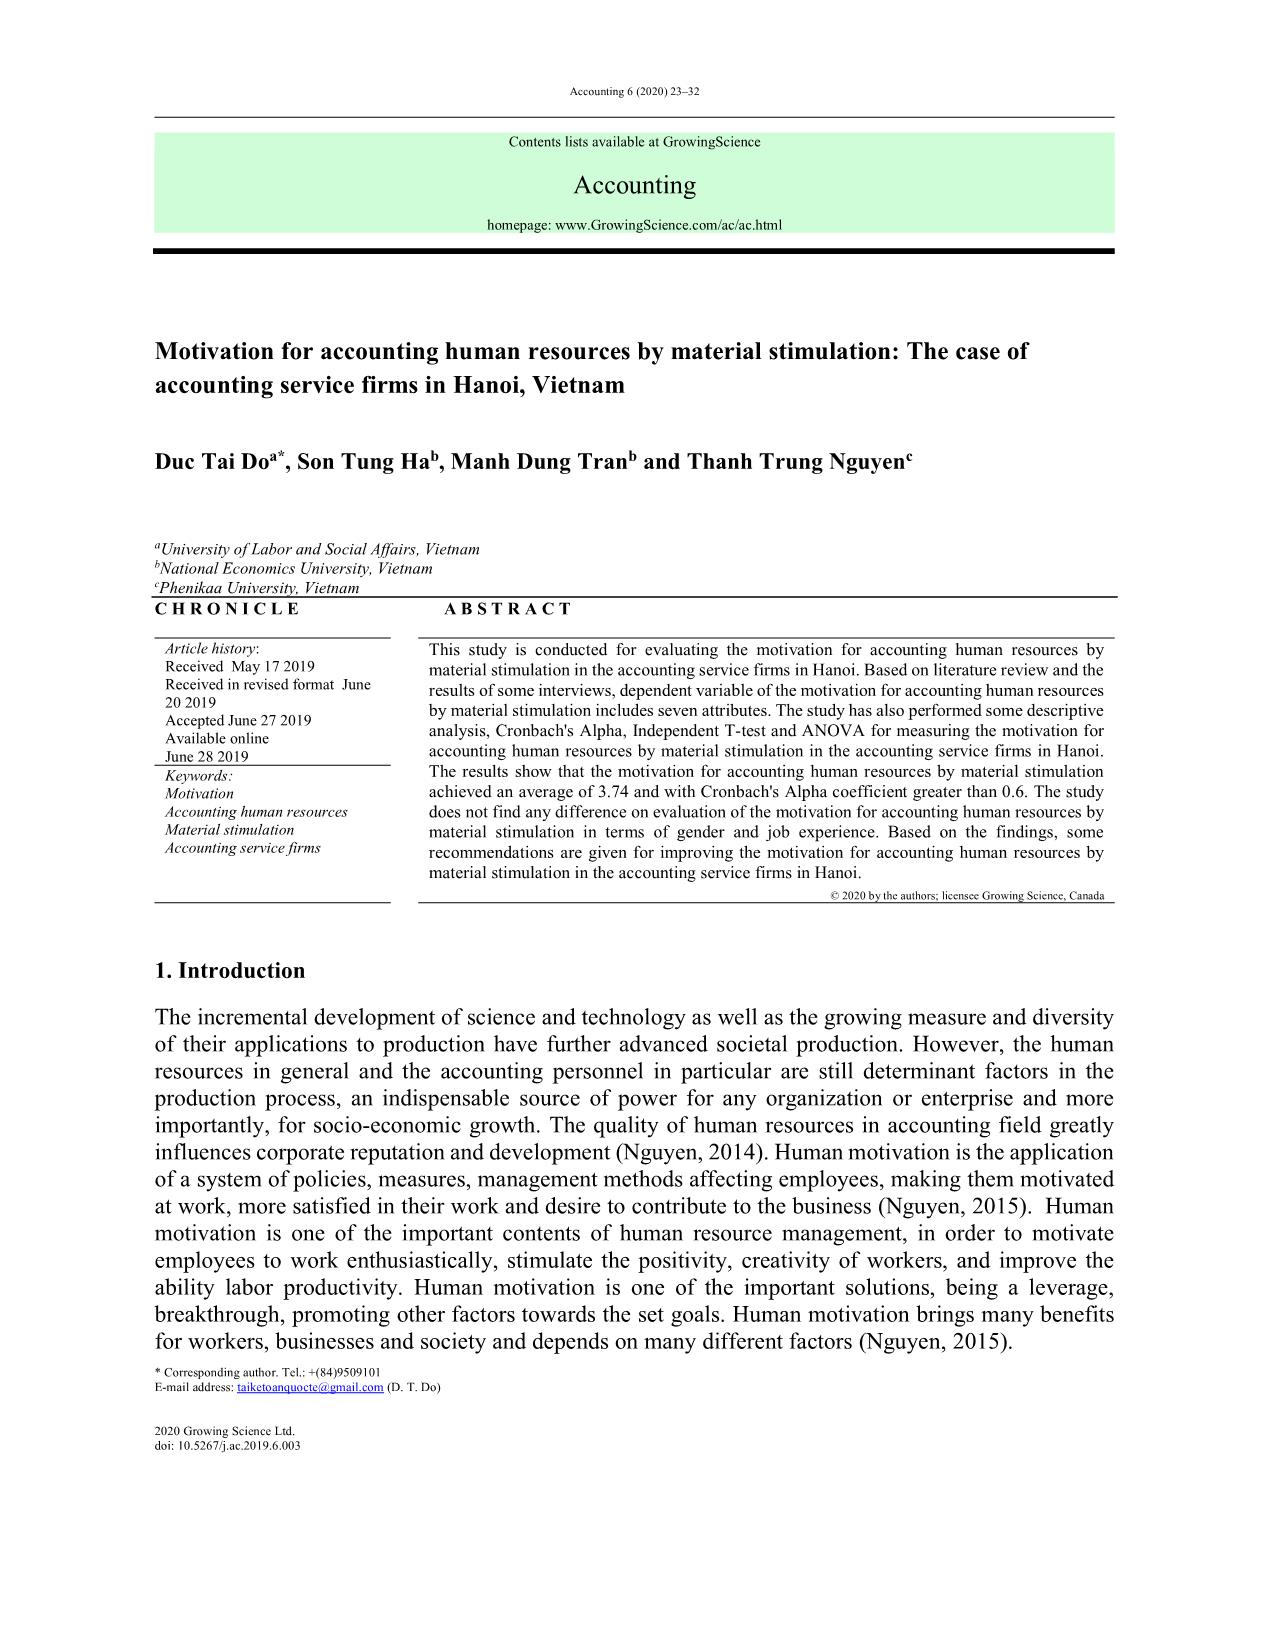 Motivation for accounting human resources by material stimulation: The case of accounting service firms in Hanoi, Vietnam trang 1